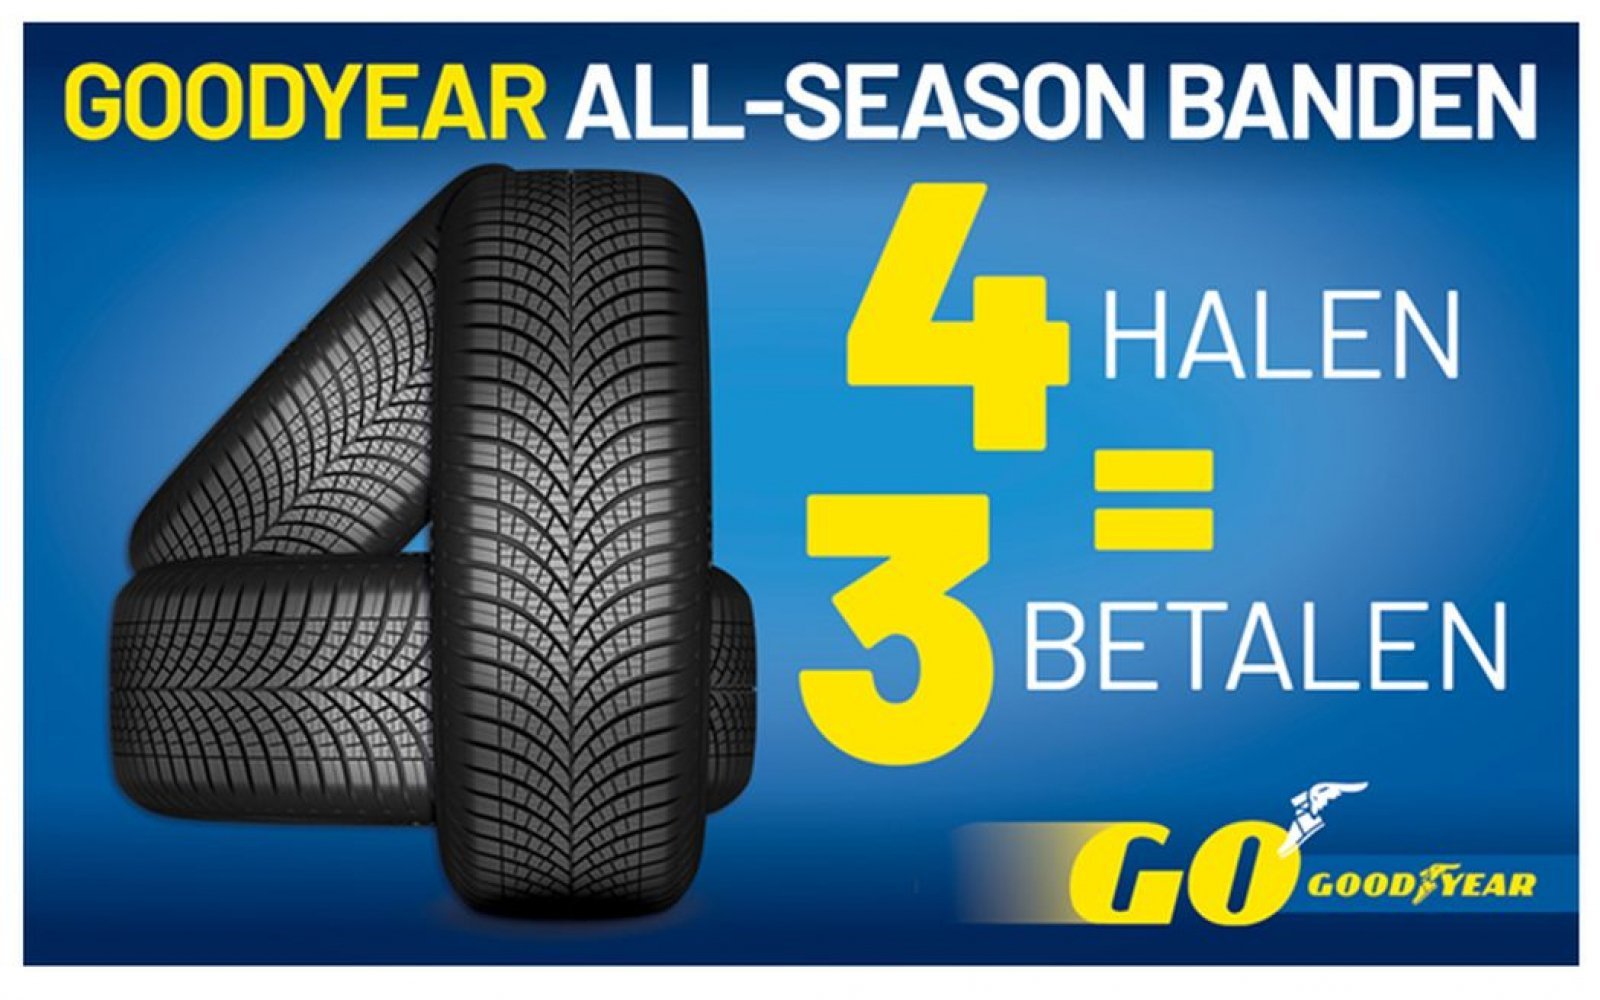 Looking for all season tires?  You can choose the best for these all-season tires